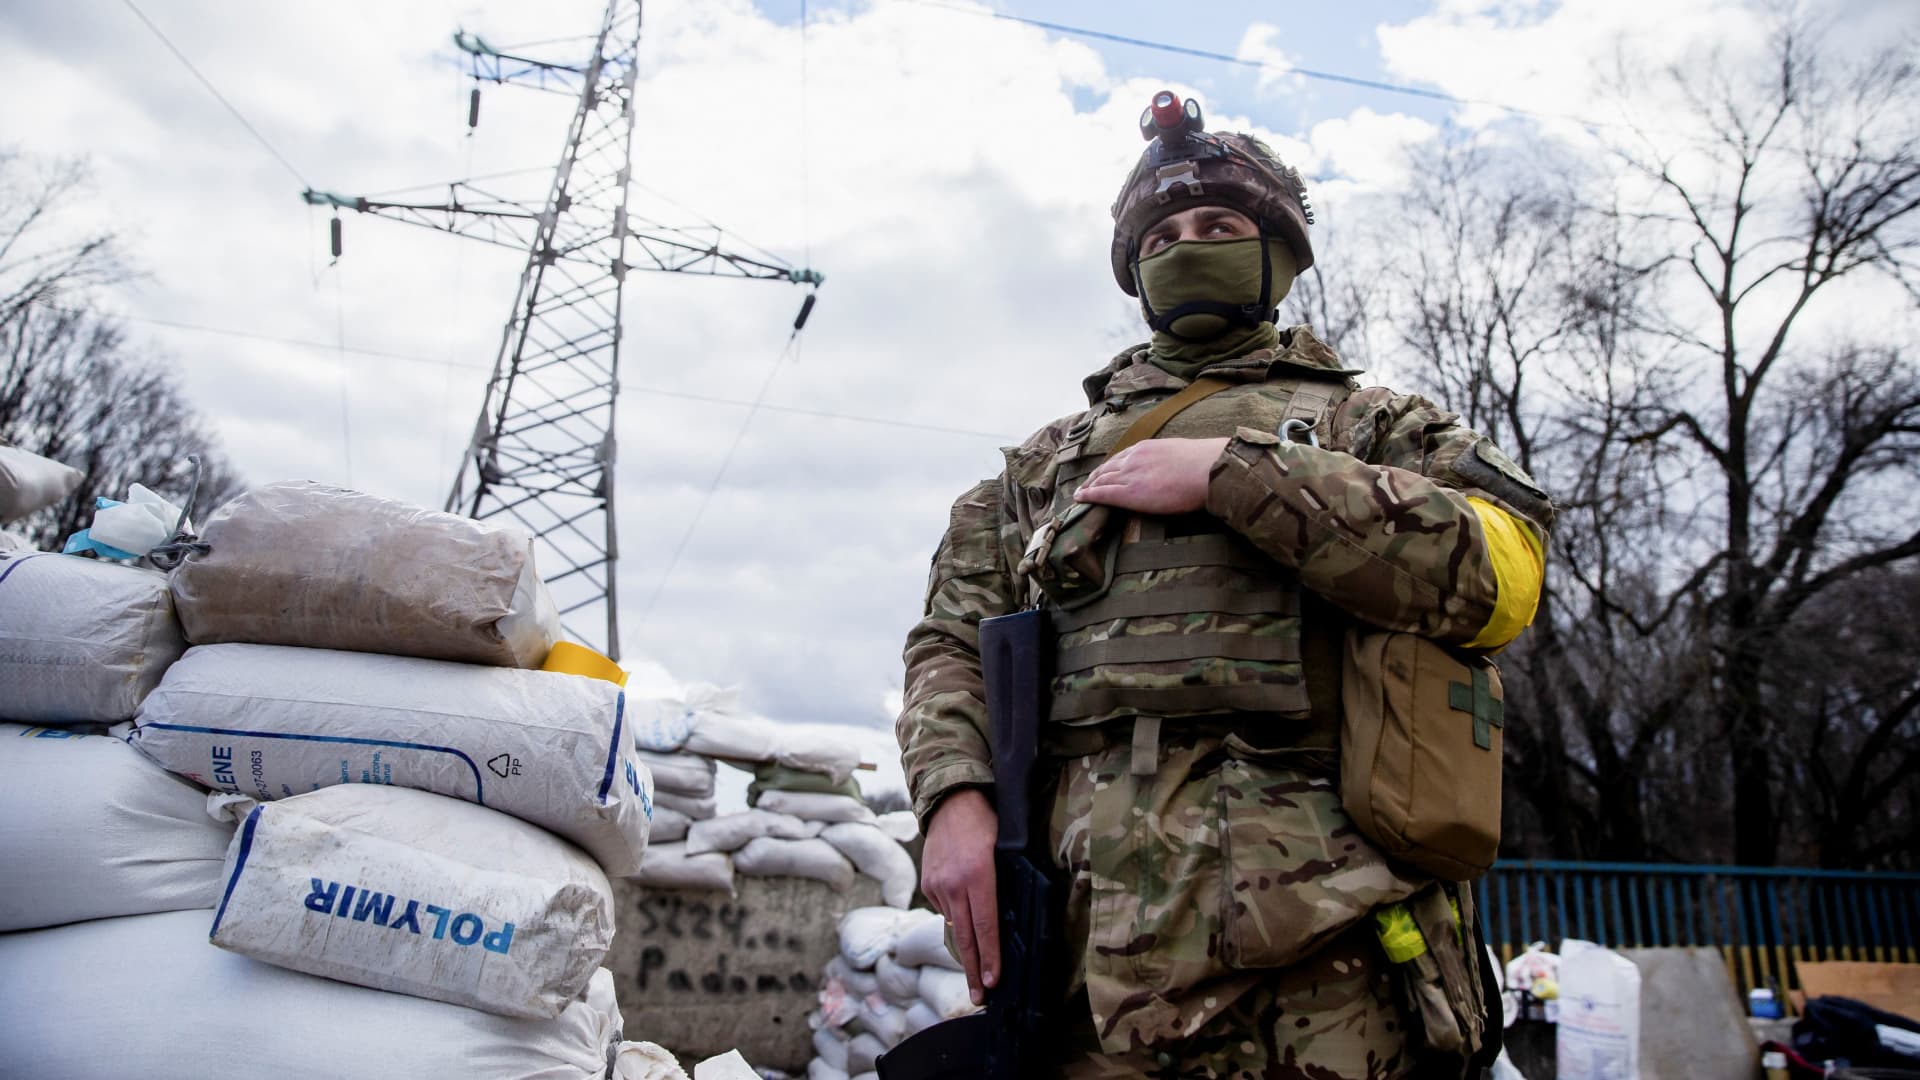 A Ukrainian service member is seen, after Russia launched a massive military operation against Ukraine, at a check point in the city of Zhytomyr, Ukraine February 27, 2022.